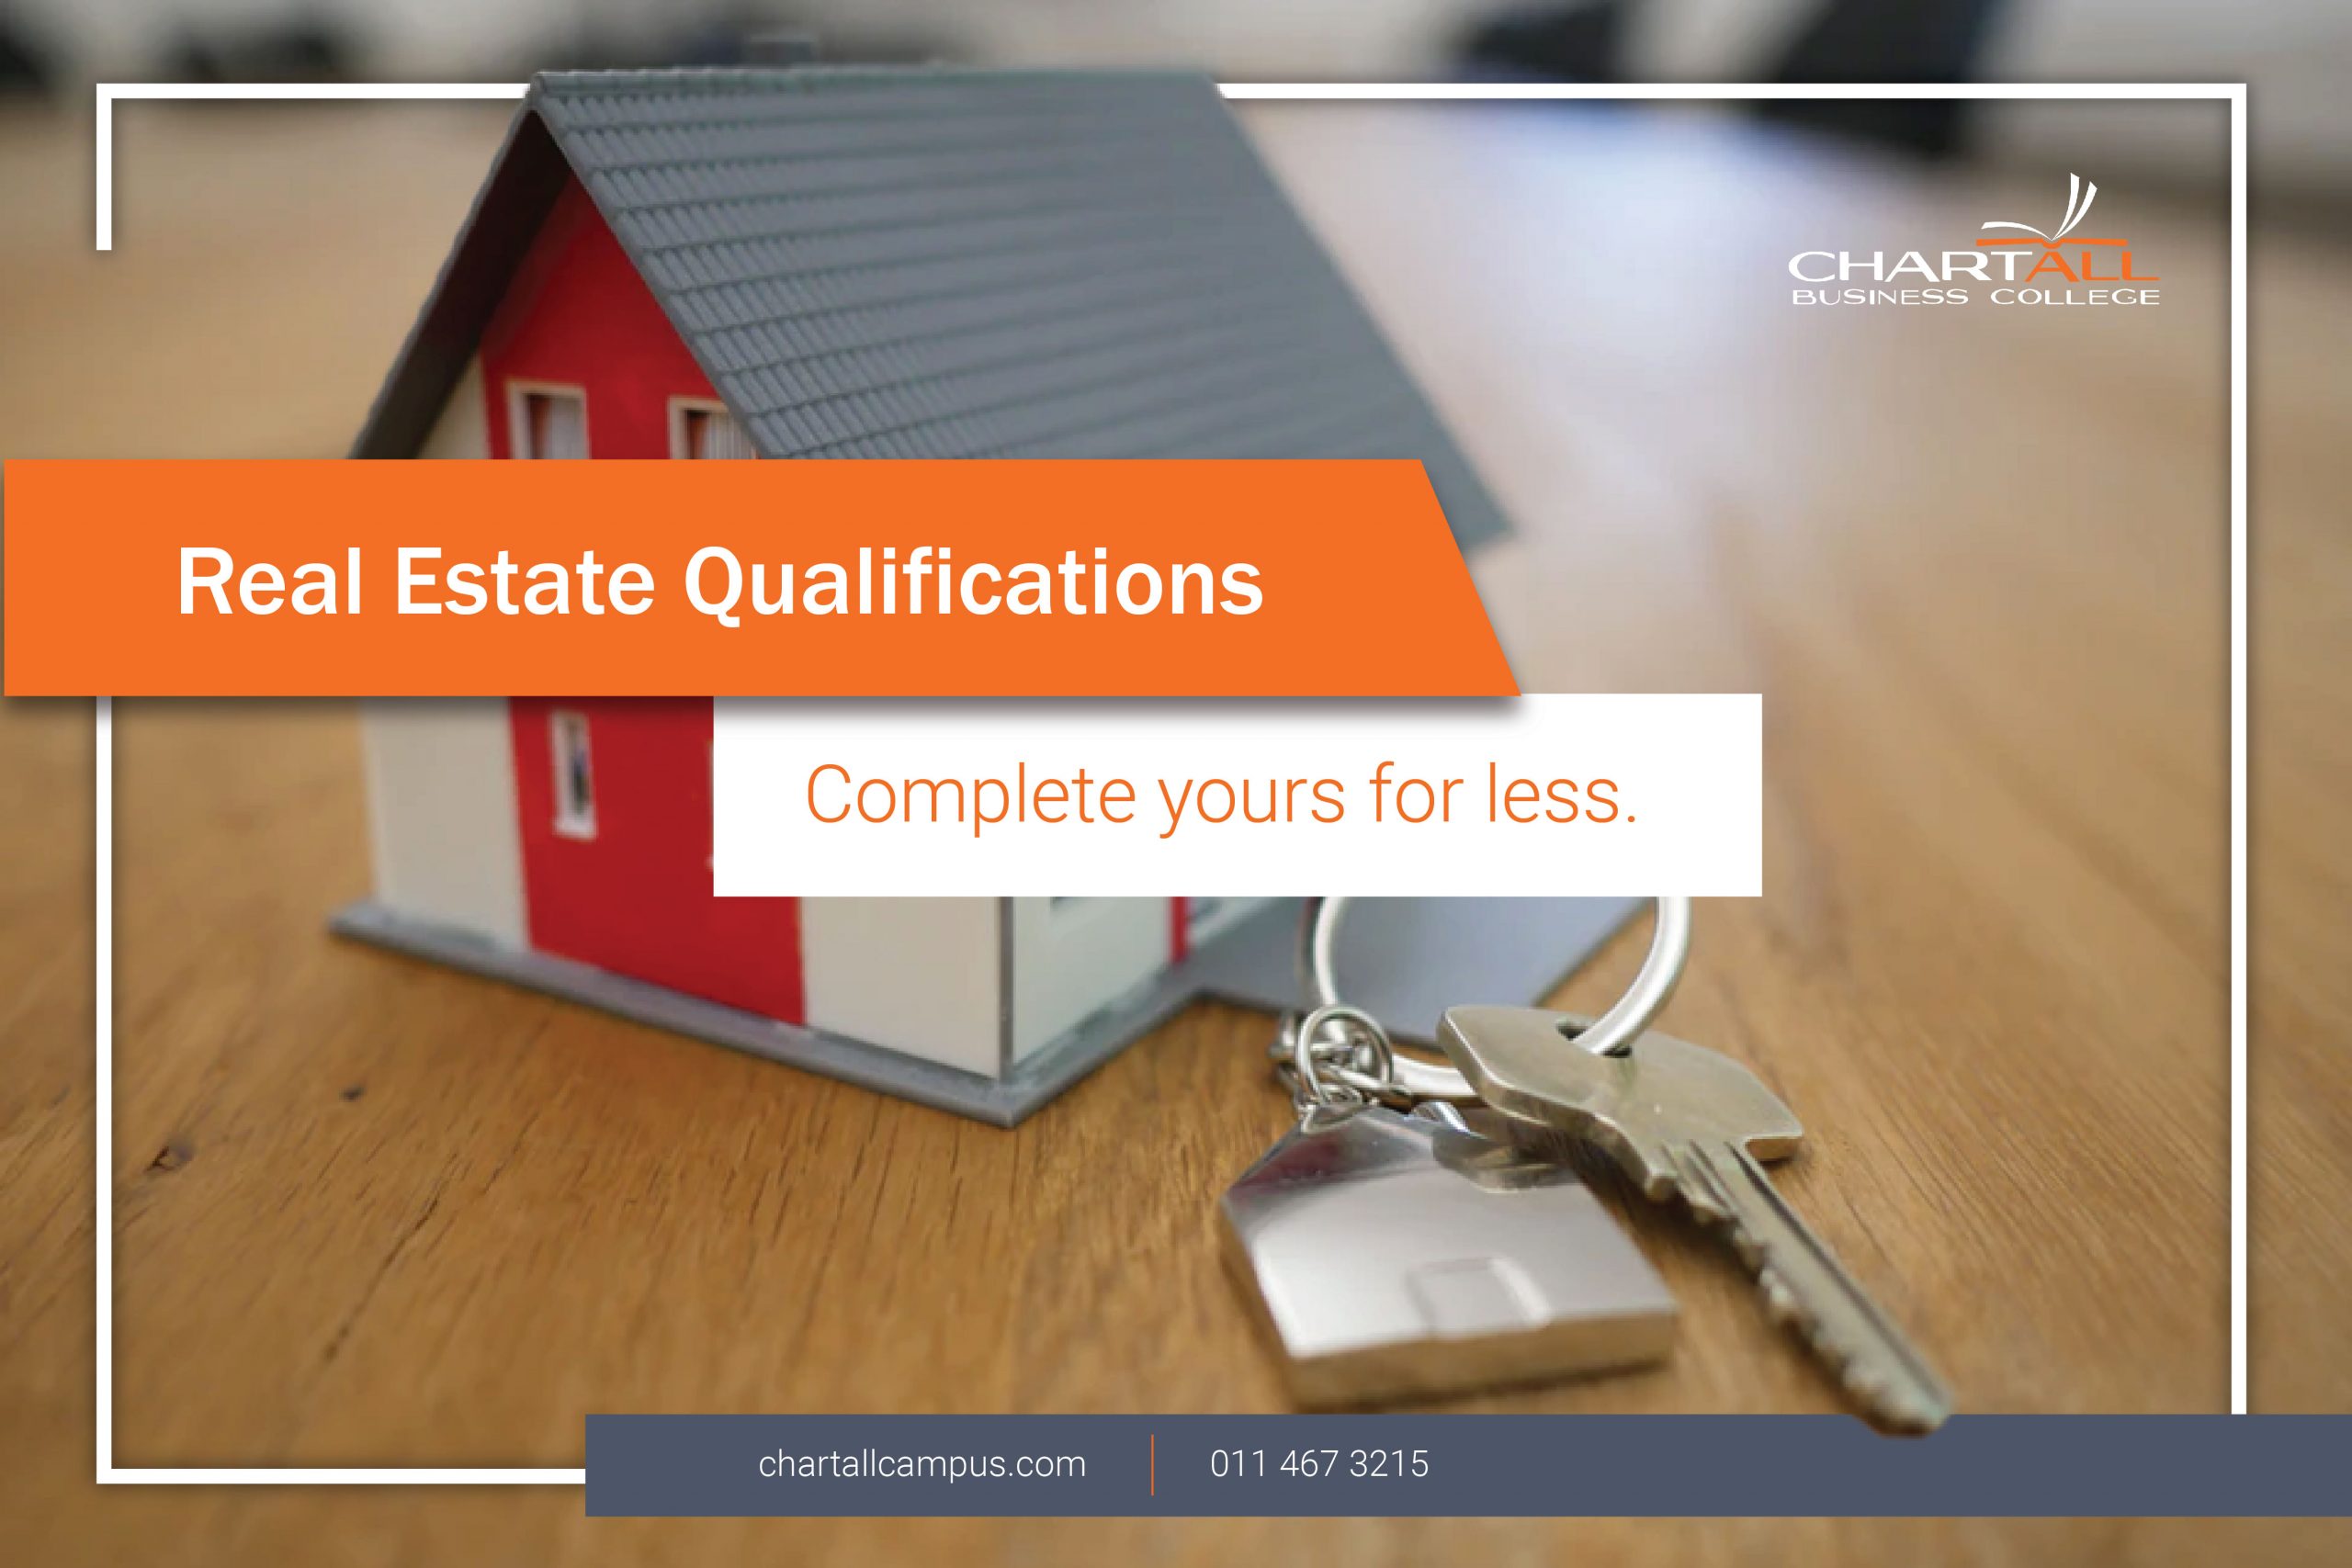 Real Estate Qualifications